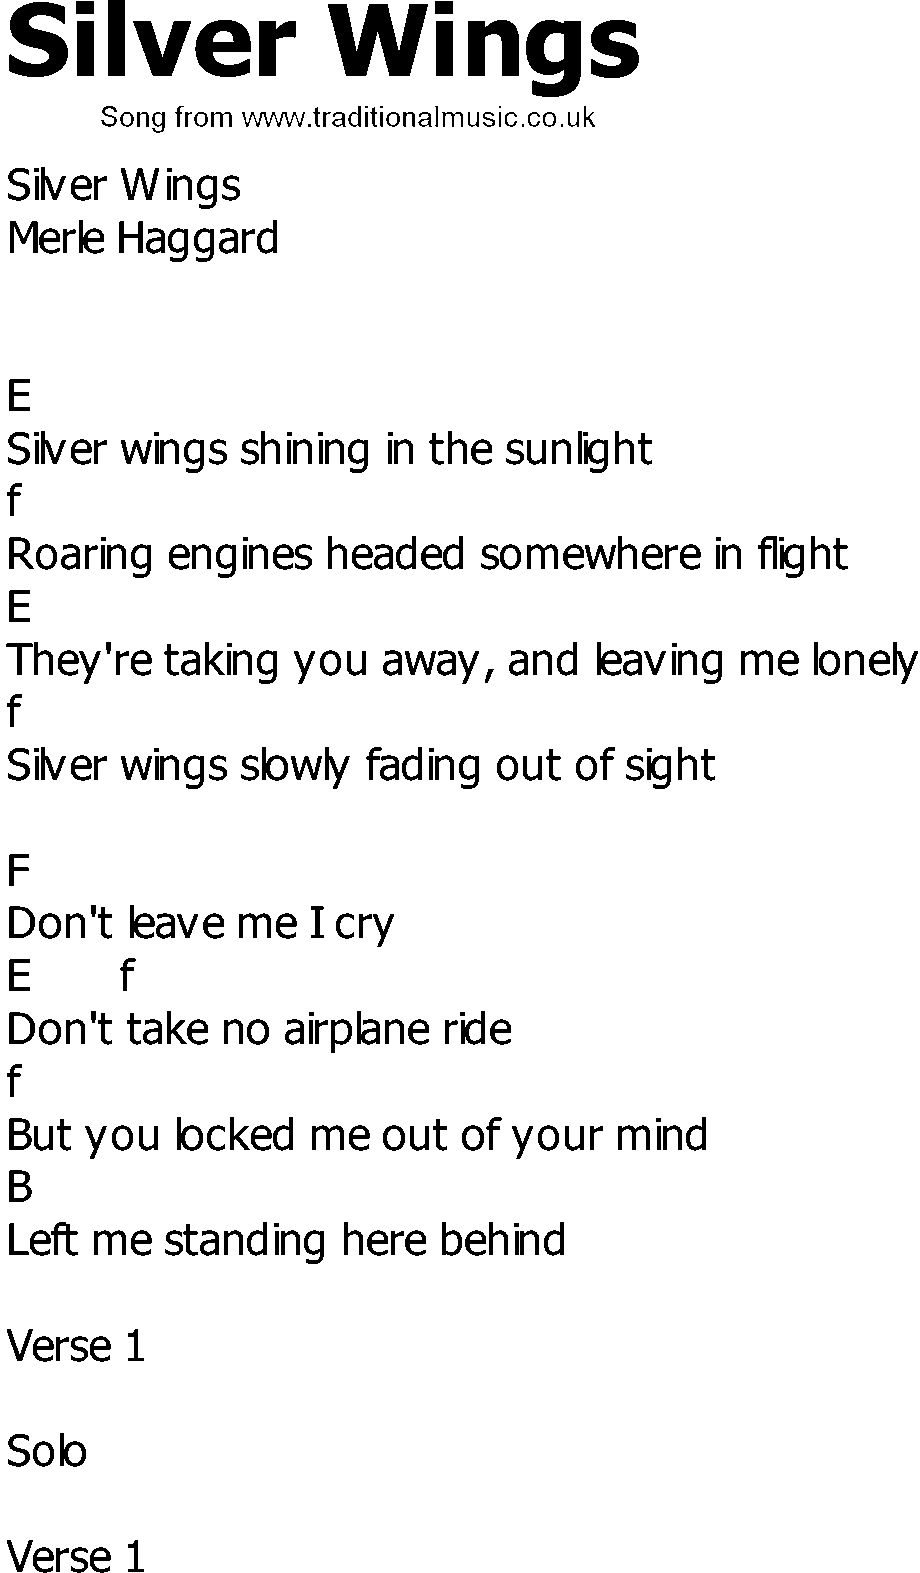 Old Country song lyrics with chords - Silver Wings